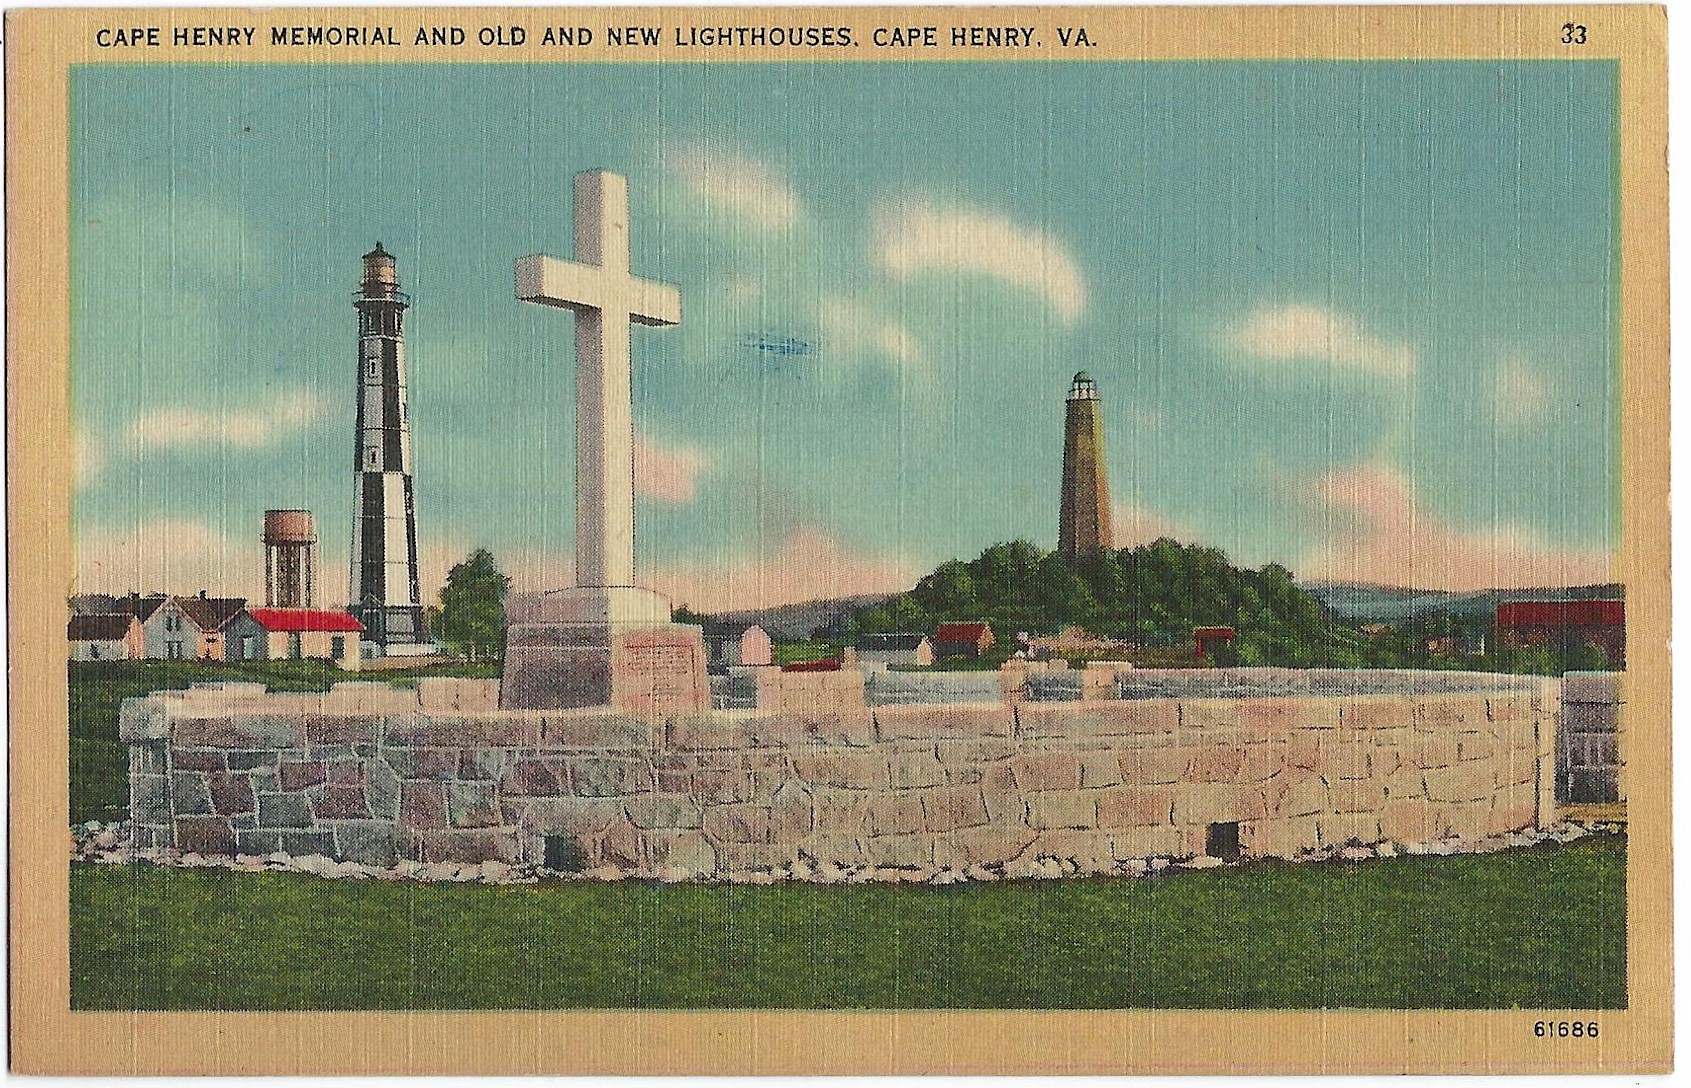 CAPE HENRY MEMORIAL AND OLD AND NEW LIGHTHOUSES POSTCARD (VA)